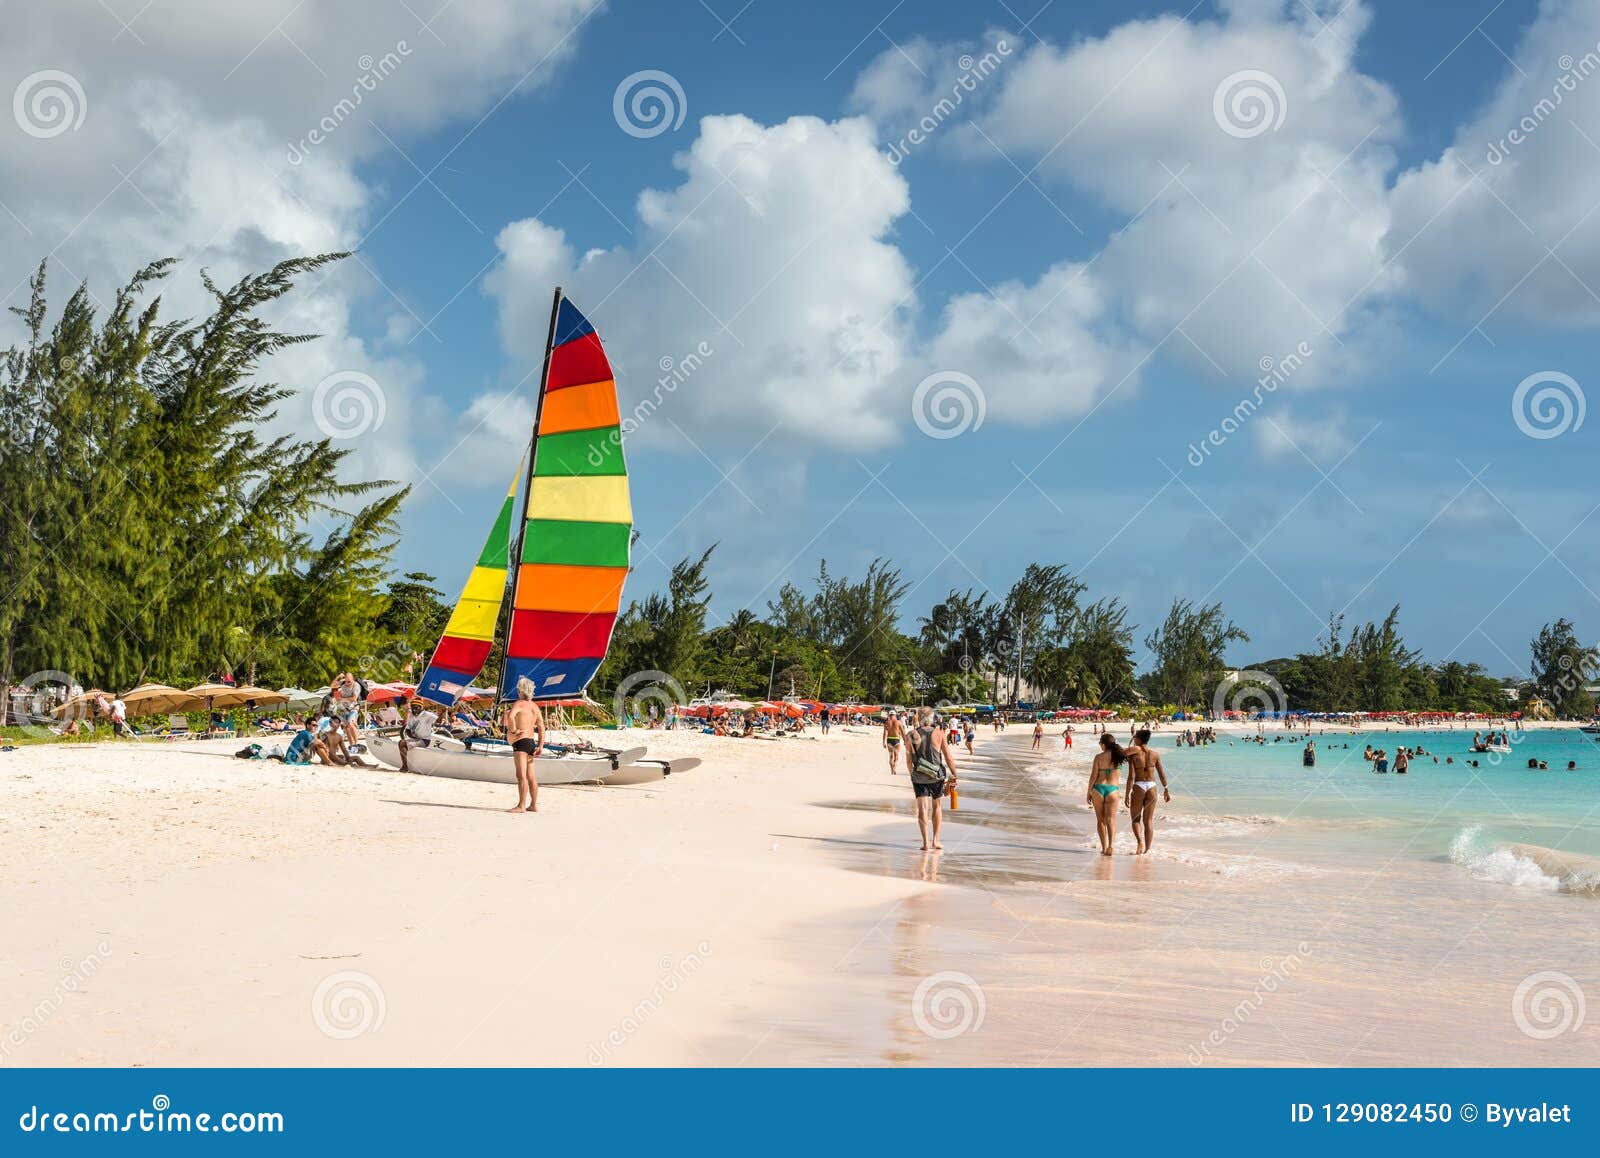 People Relaxing On The Brownes Beach In Barbados Caribbean Editorial Image Image Of Outdoor